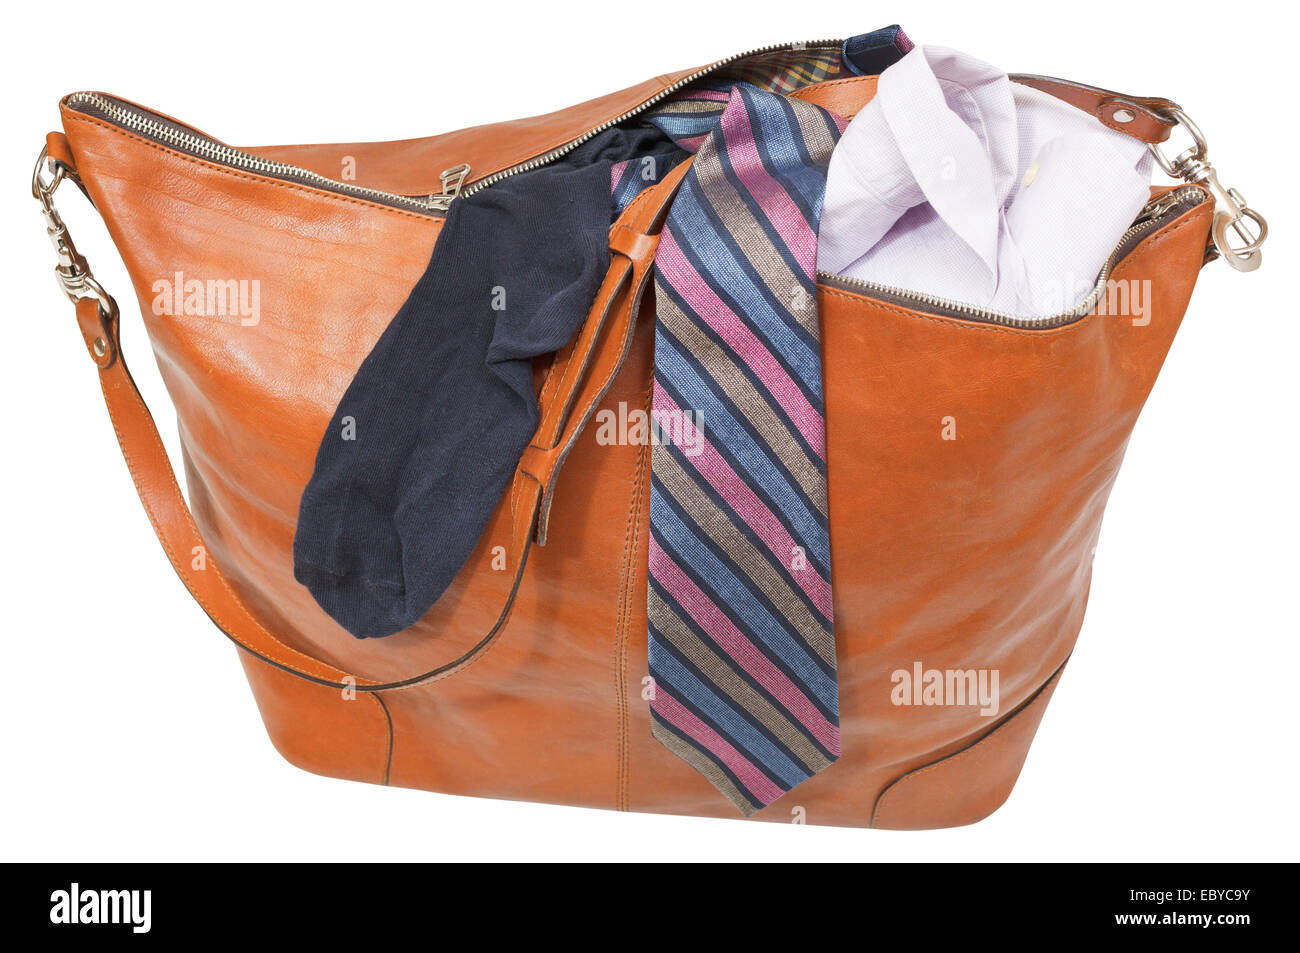 male leather handbag with shirt, tie, sock isolated on white background Stock Photo